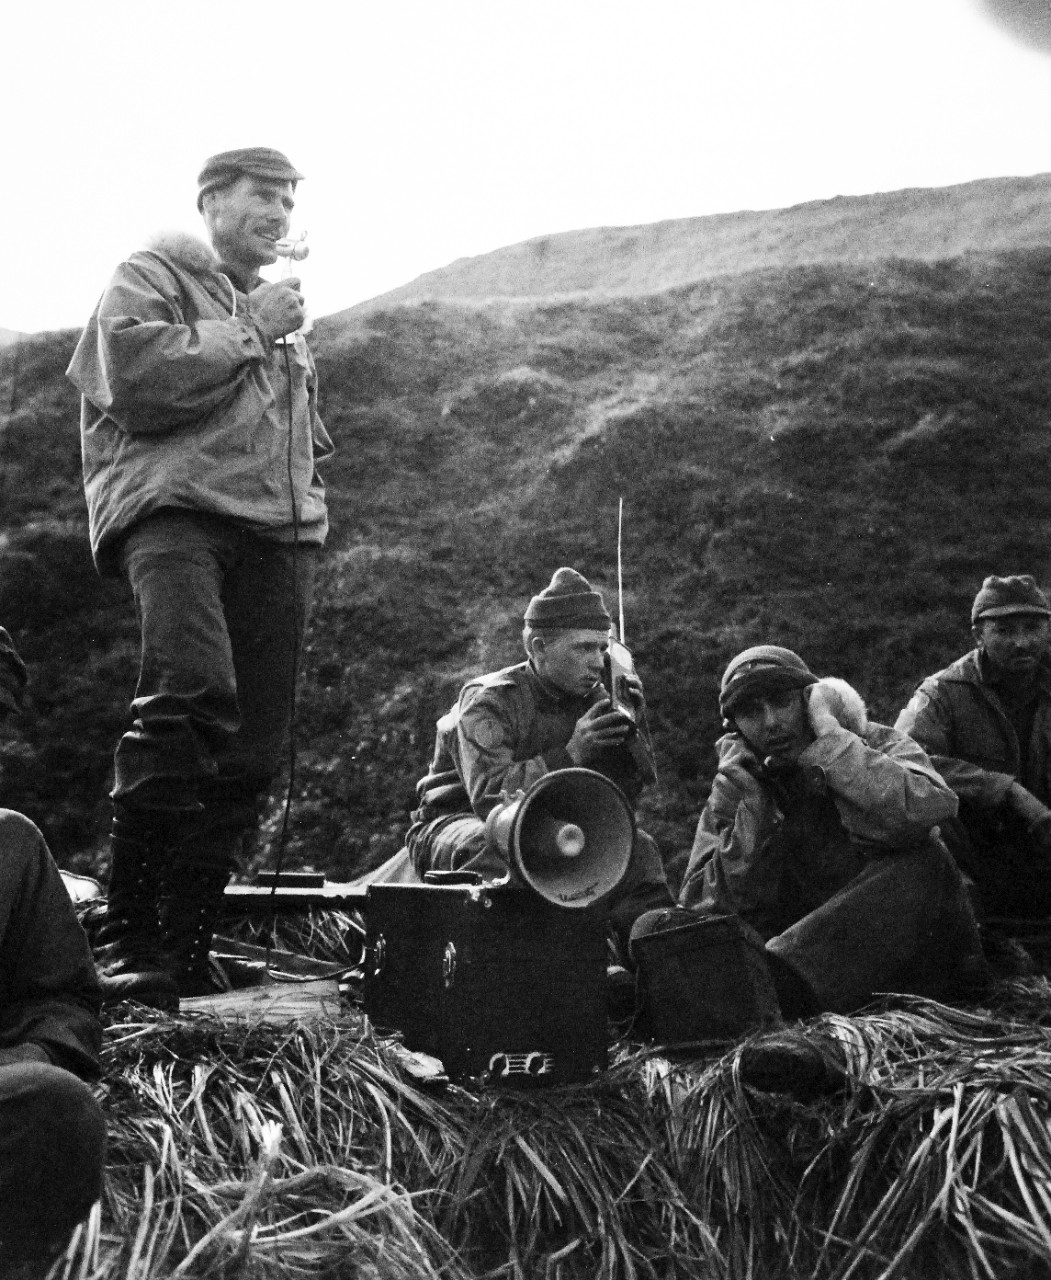 80-G-43534:  Aleutian Islands Campaign, June 1943-August 1943.   Invasion of Kiska Island, August 15-24, 1943.    Members of an observation unit of the vanguard of the joint American-Canadian invading force, following landing at Kiska, Aleutians, talk to their superiors over portable radio.  Photograph released October 29, 1943.   Official U.S. Navy Photograph, now in the collections of the National Archives.    (2015/8/18).